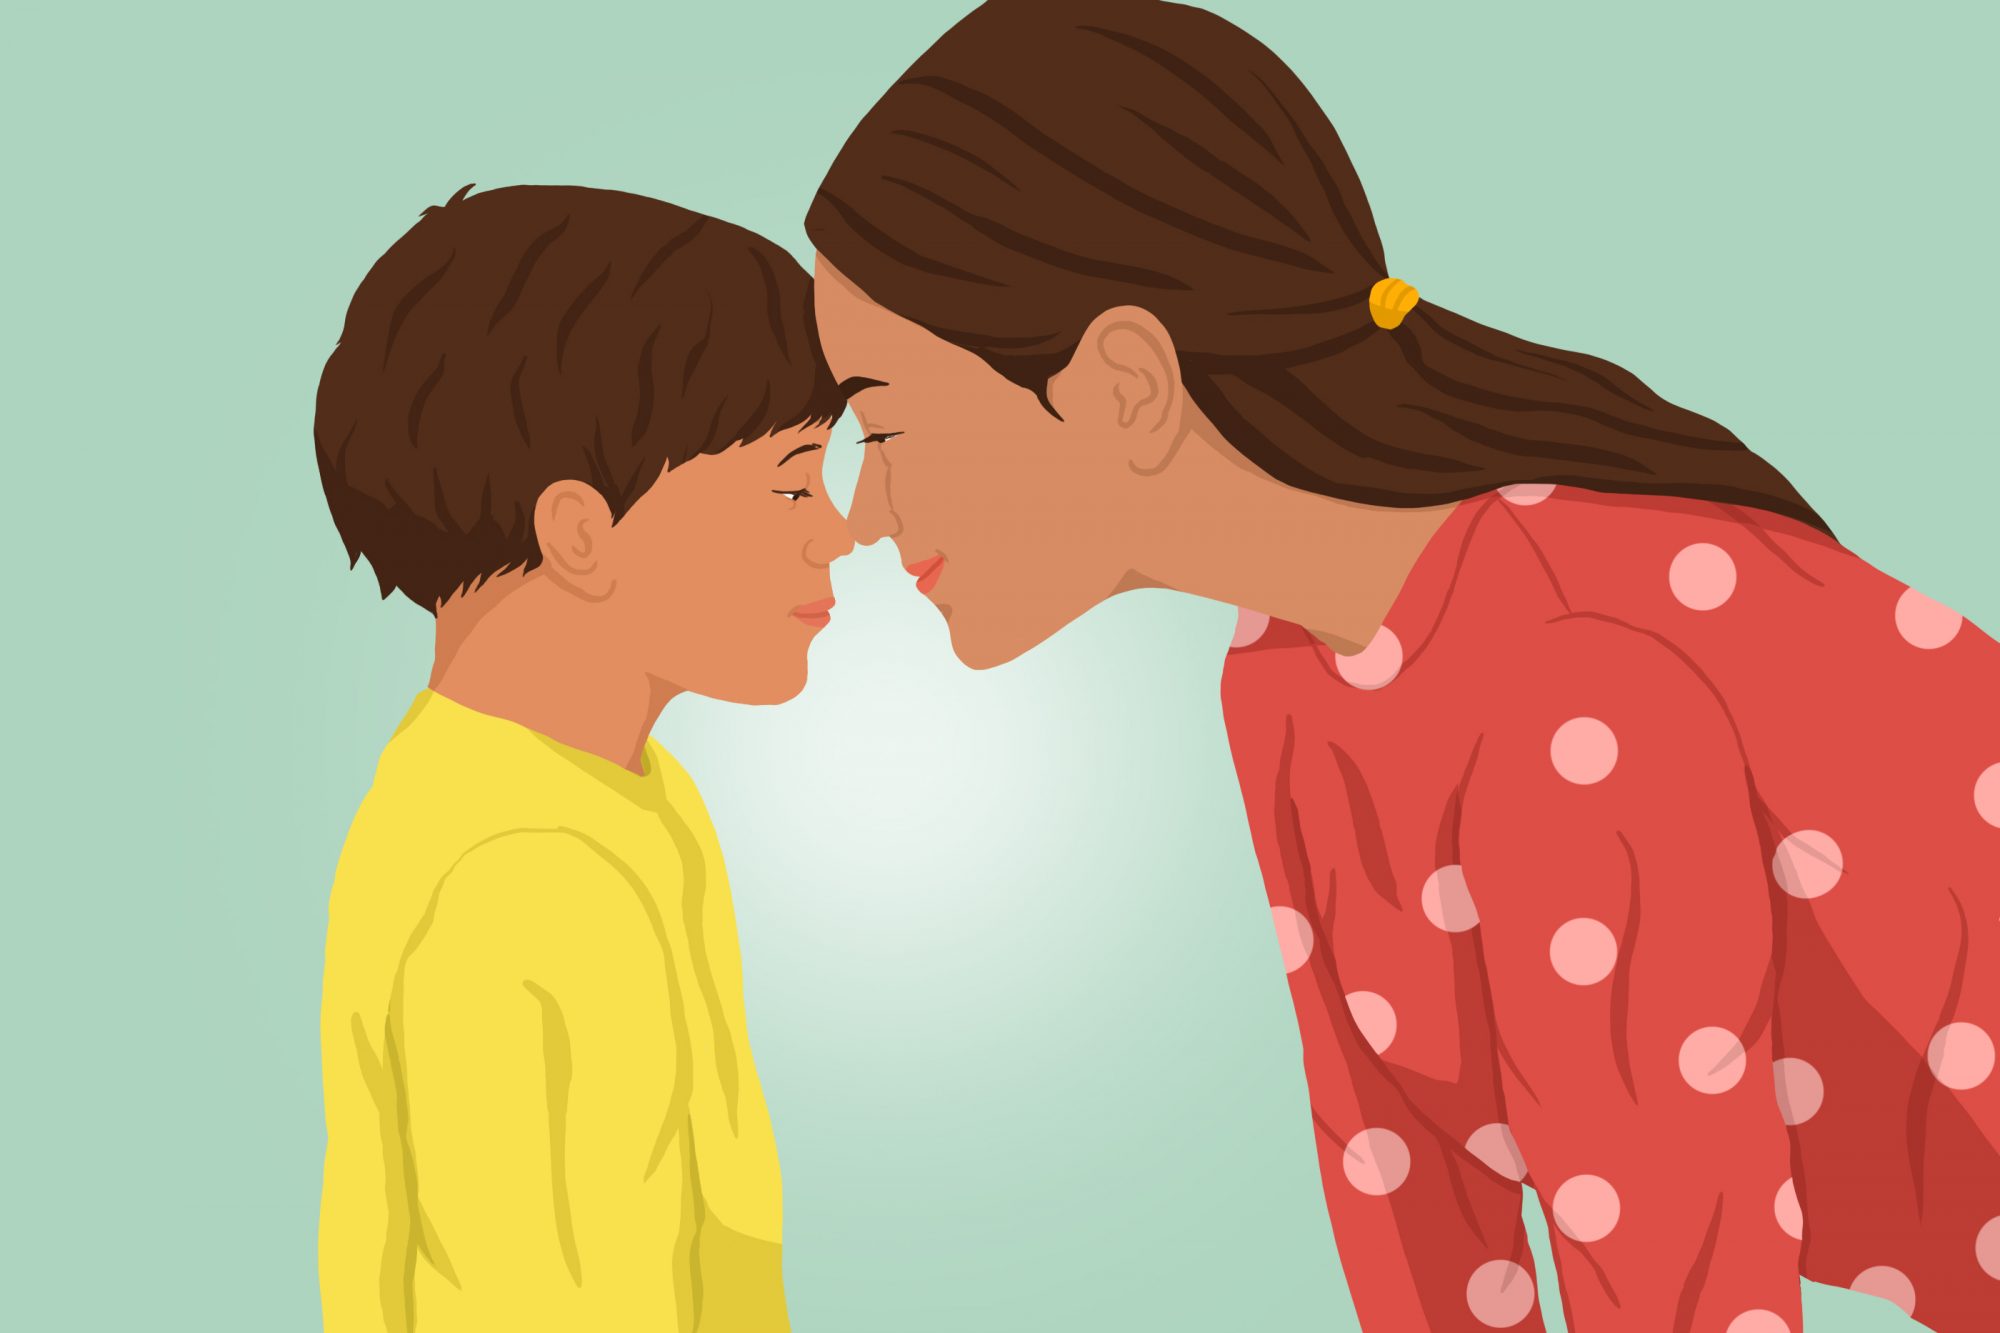 An illustration of a mom and a her son.